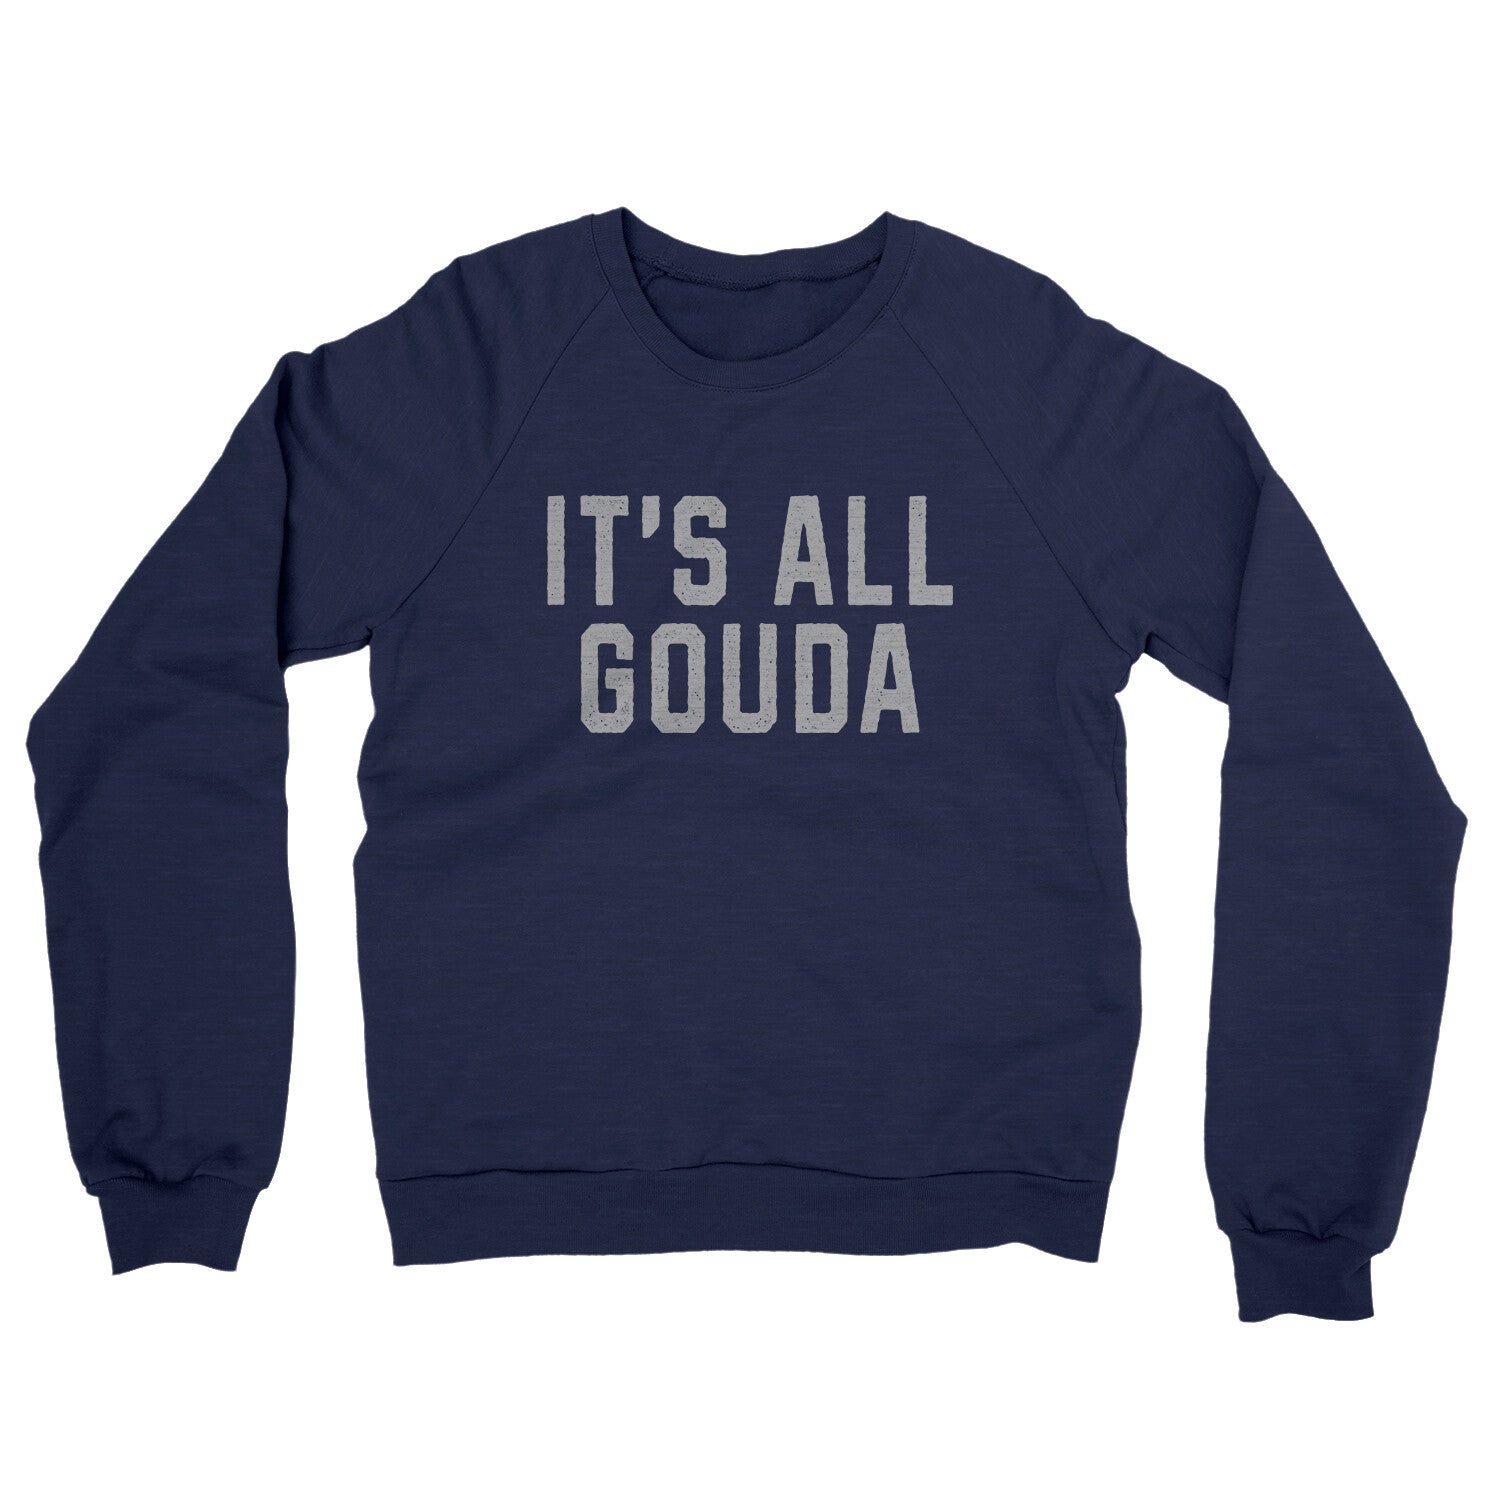 It’s All Gouda in Navy Color